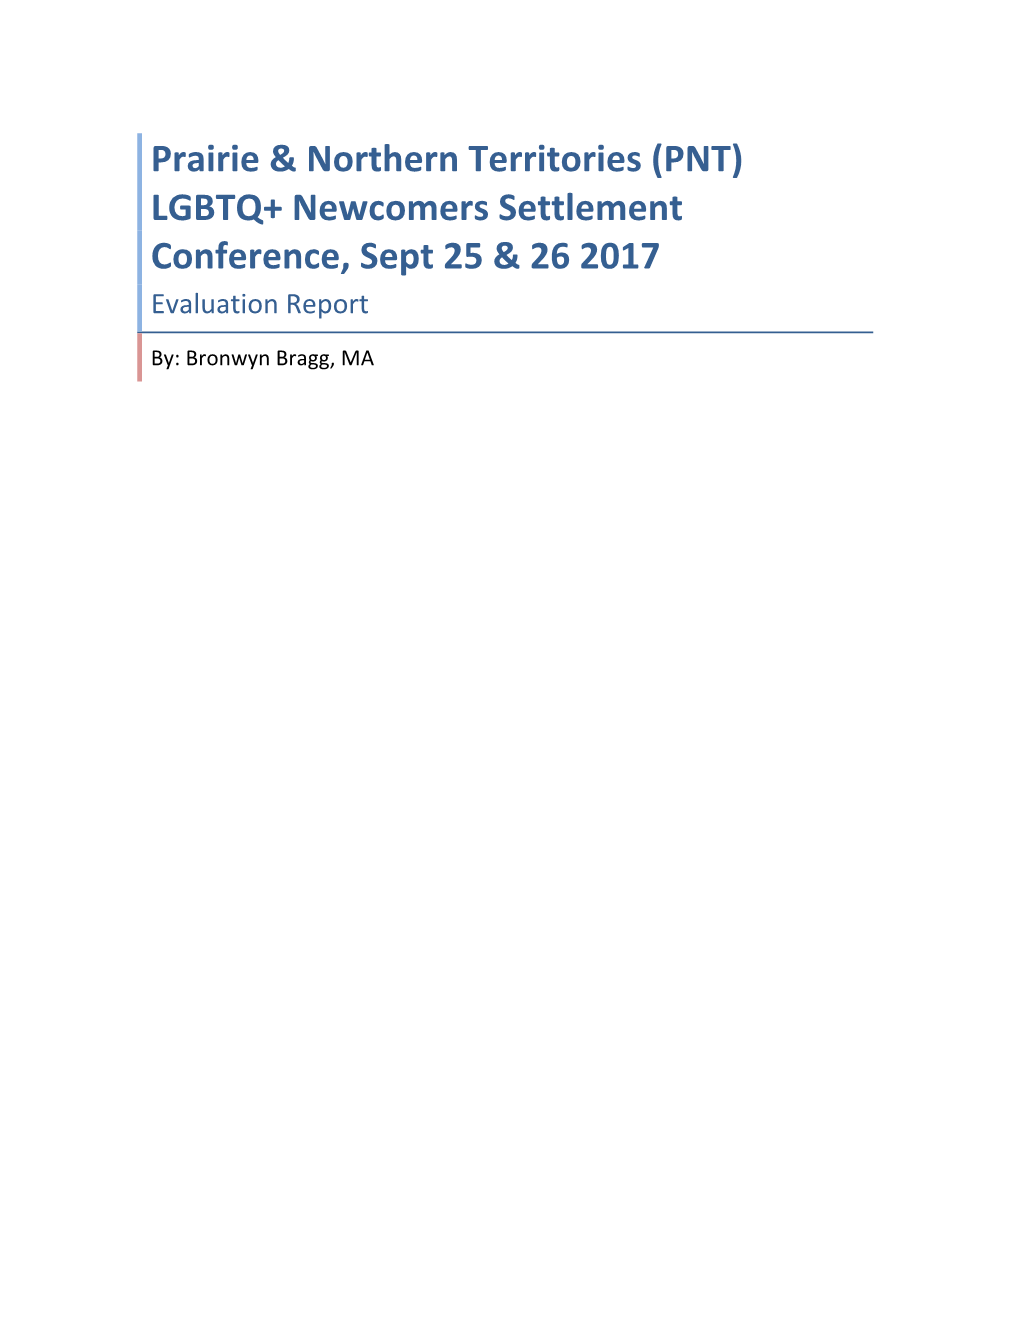 Prairie & Northern Territories (PNT) LGBTQ+ Newcomers Settlement Conference, Sept 25 & 26 2017